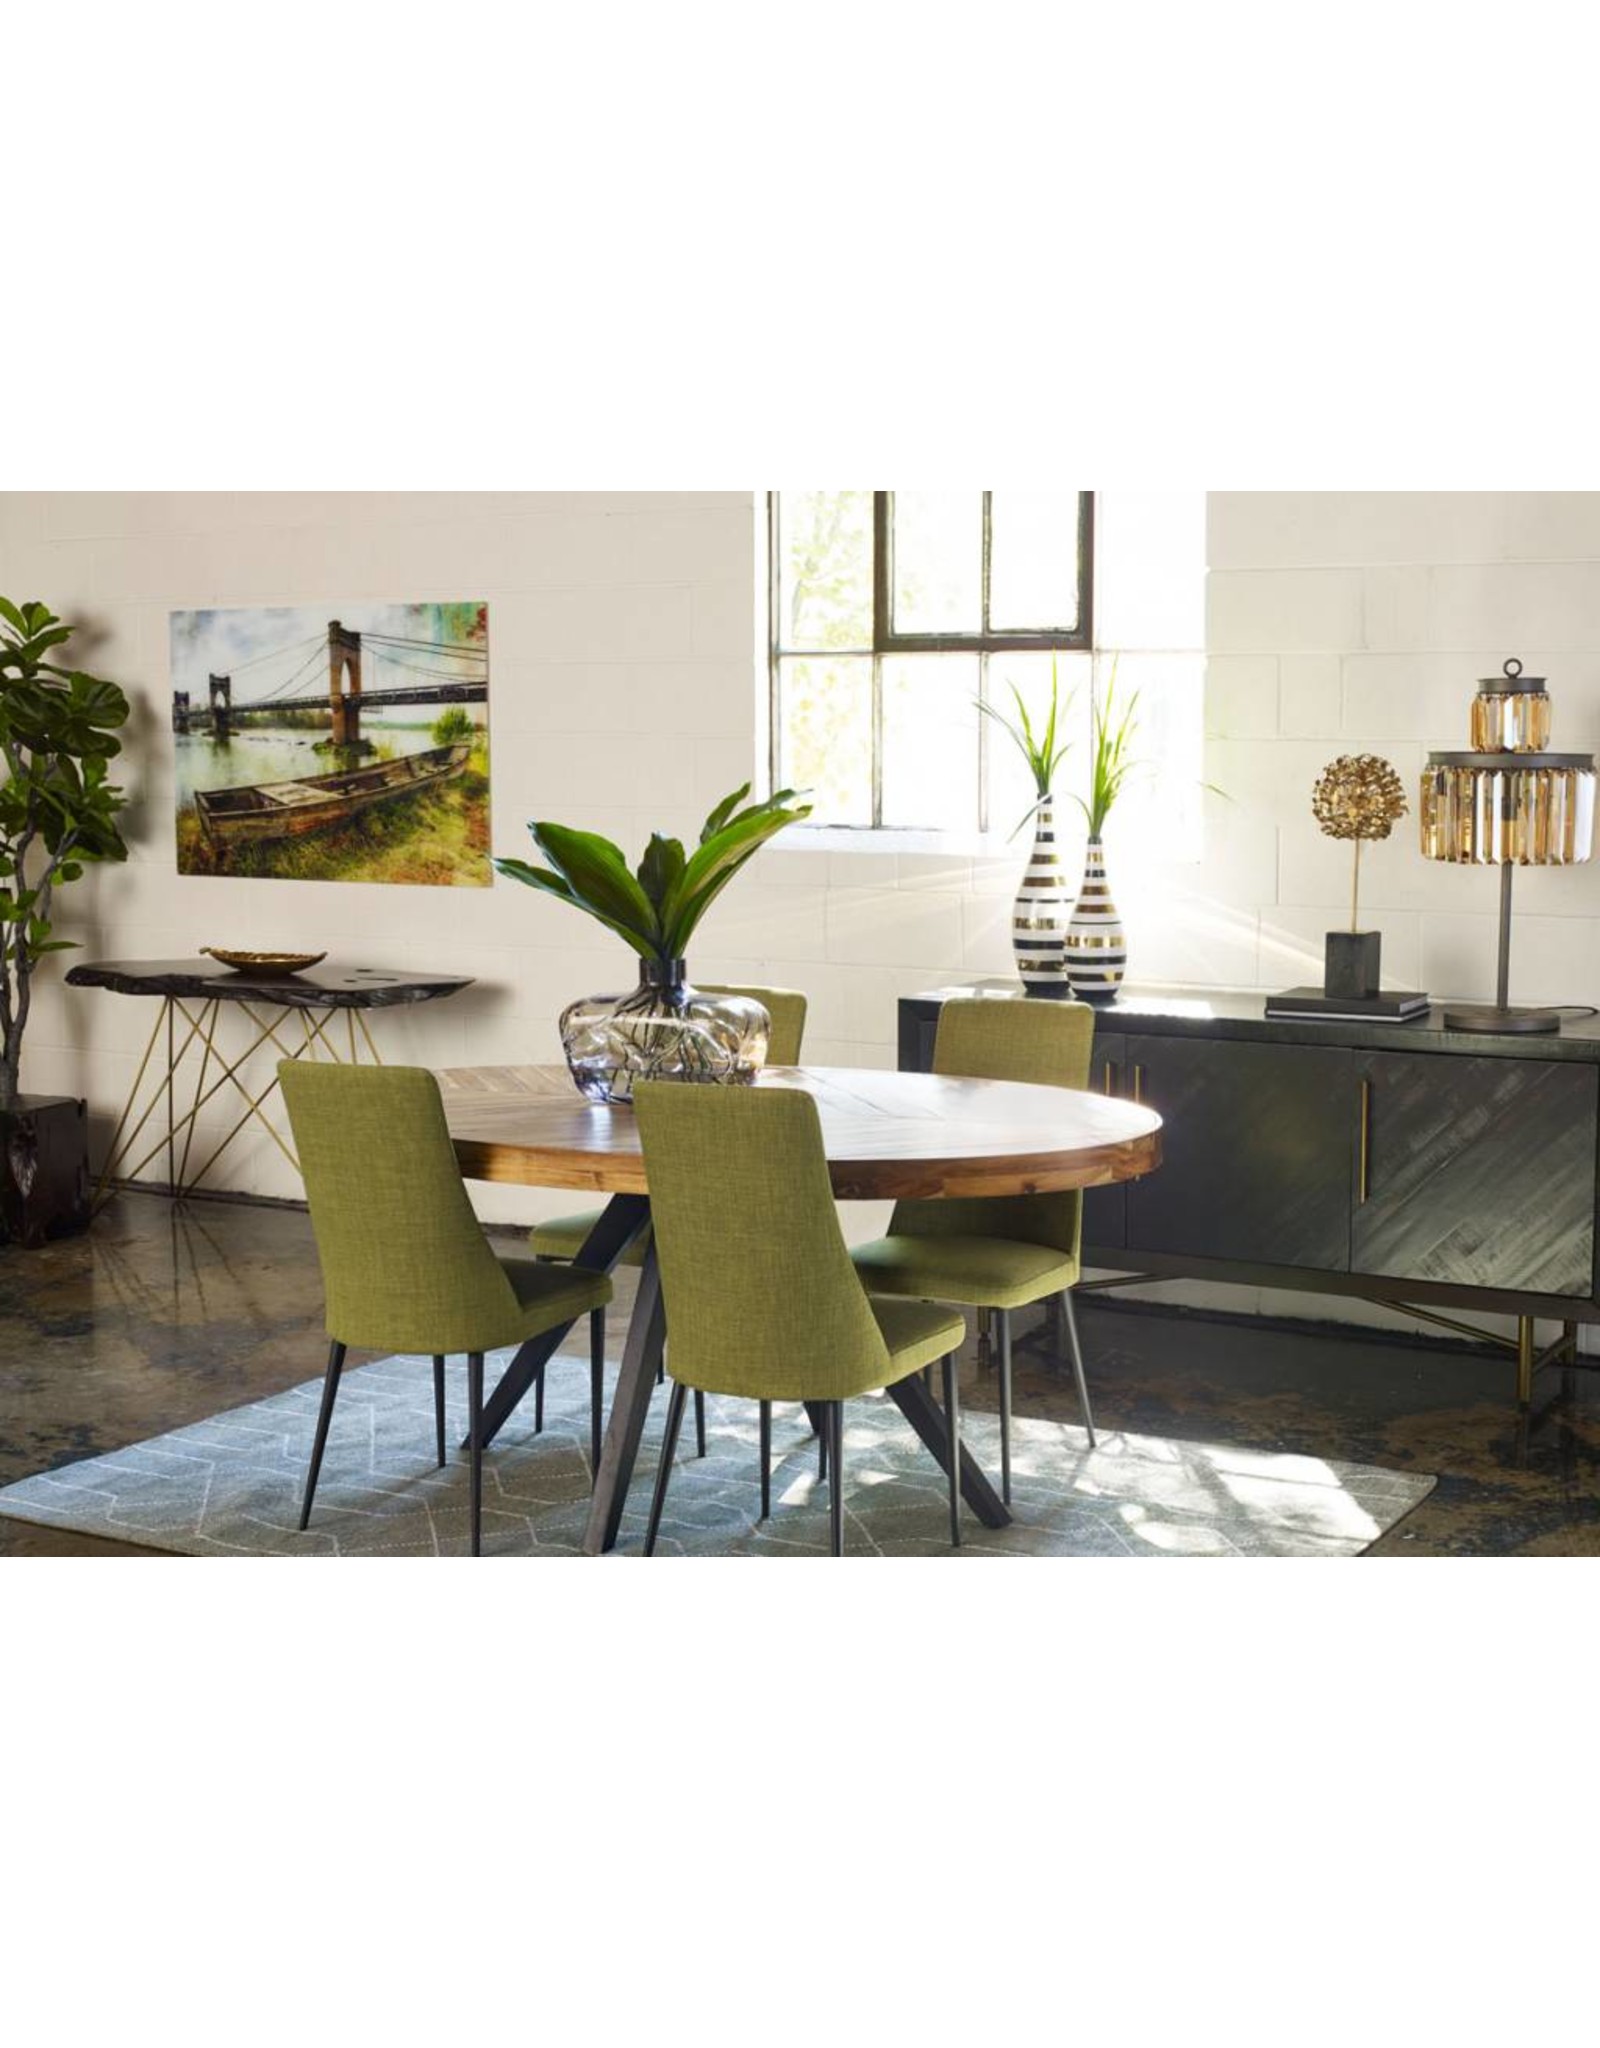 Monroe & Kent PARQ OVAL DINING TABLE